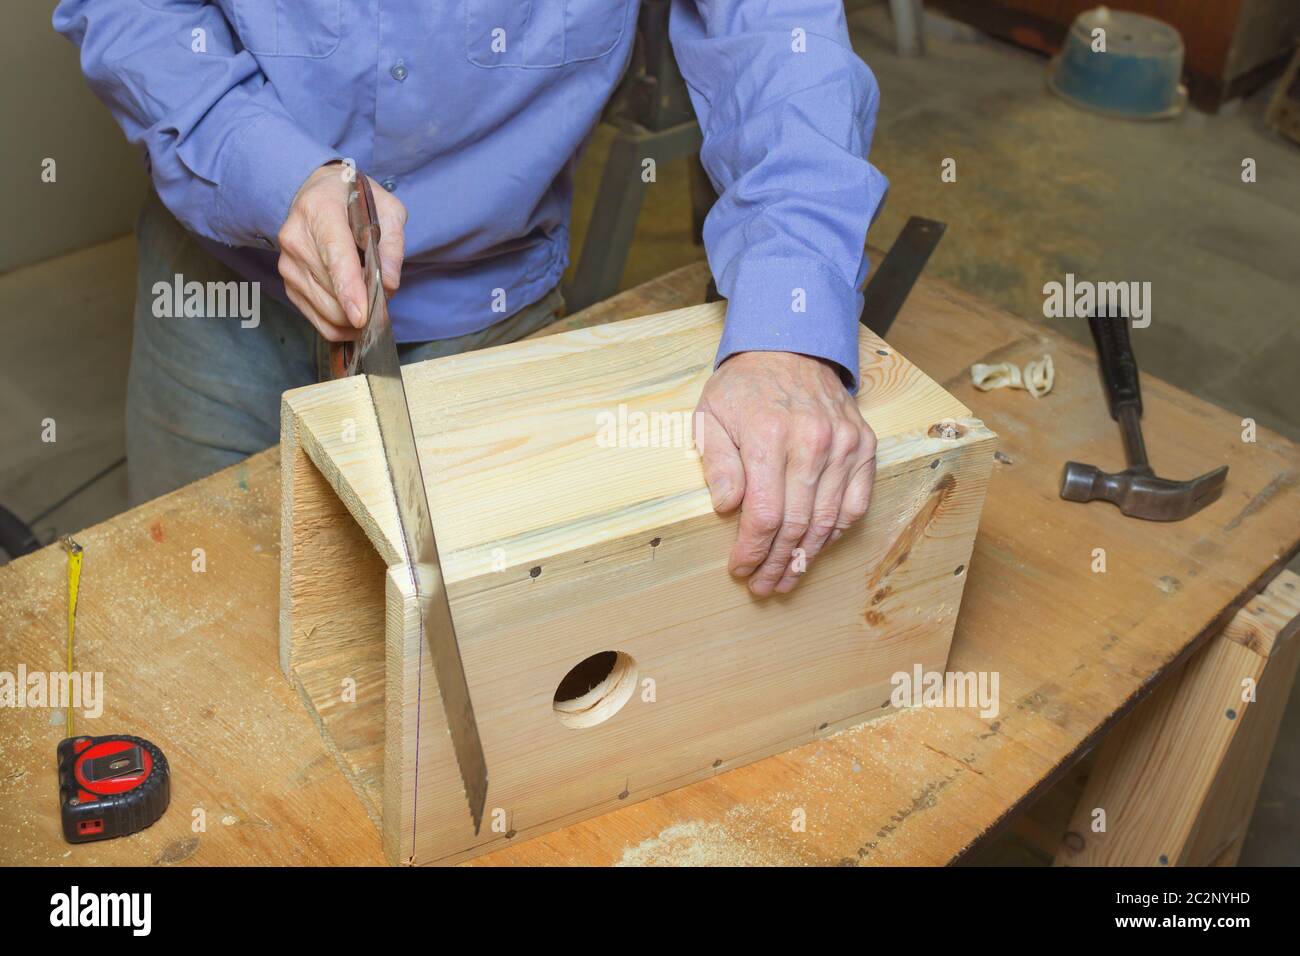 Work on manufacture of birdhouse Stock Photo